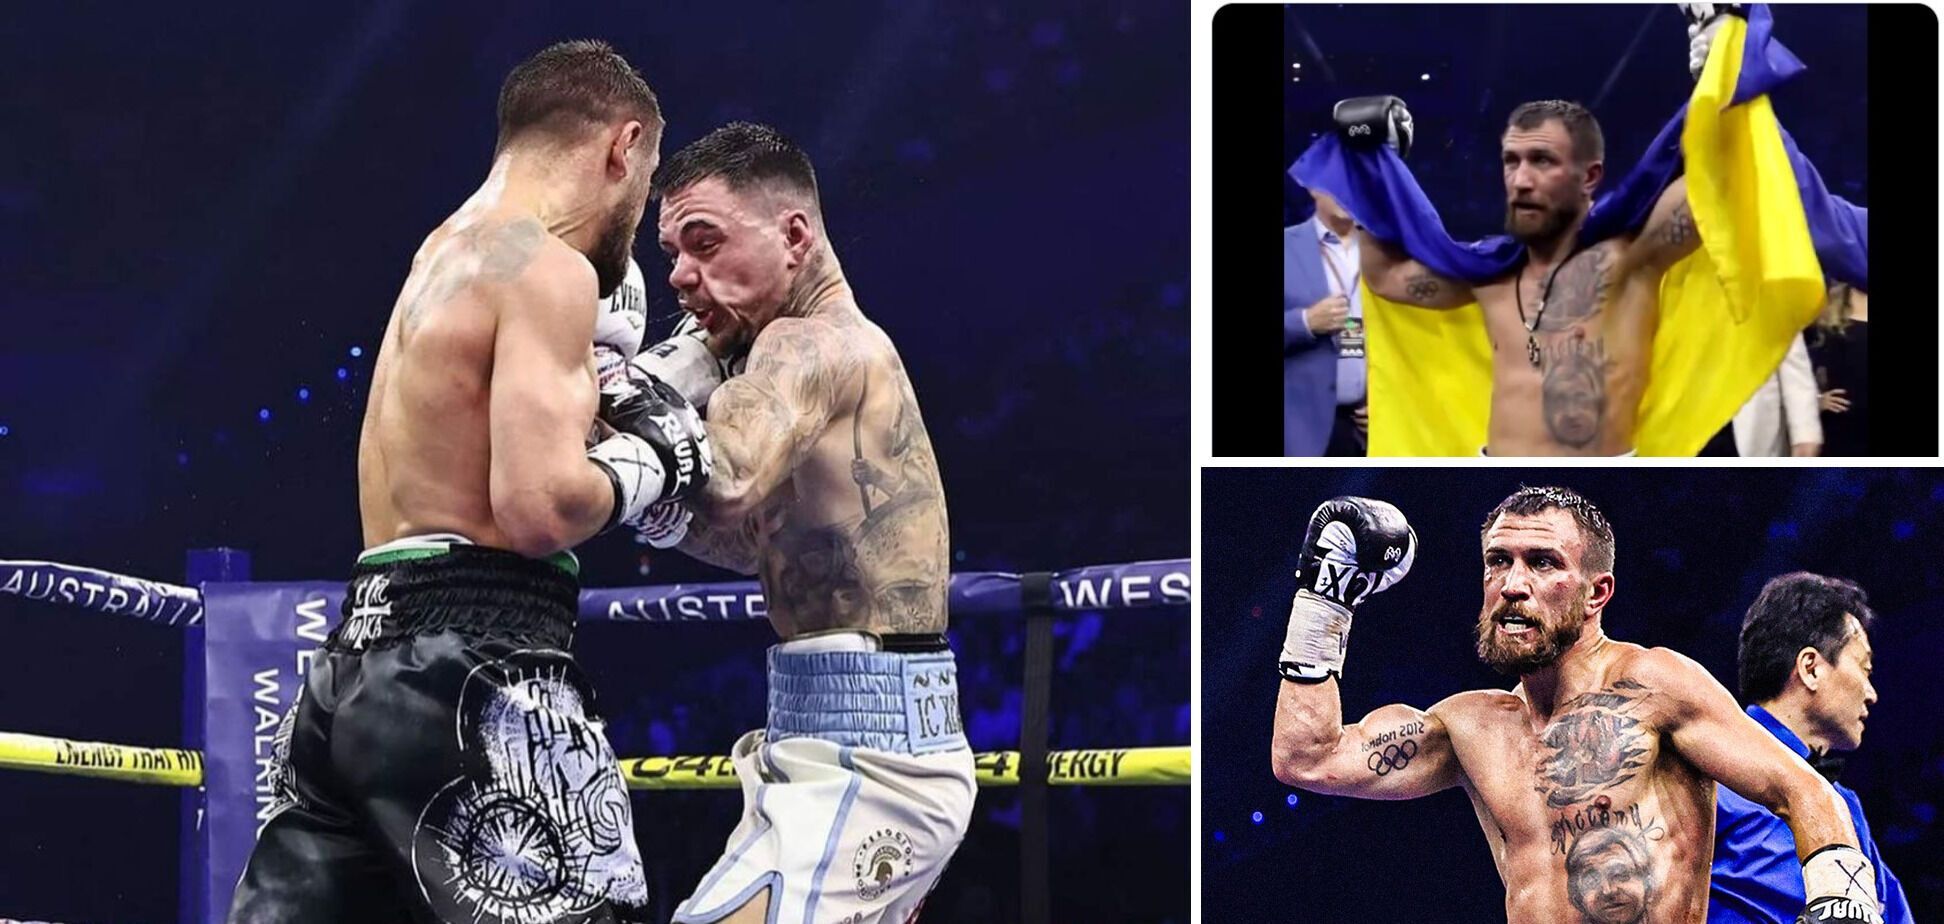 ''I've never seen anything like it''. The incredible incident before Lomachenko's fight garnered 650 thousand views per day. Video